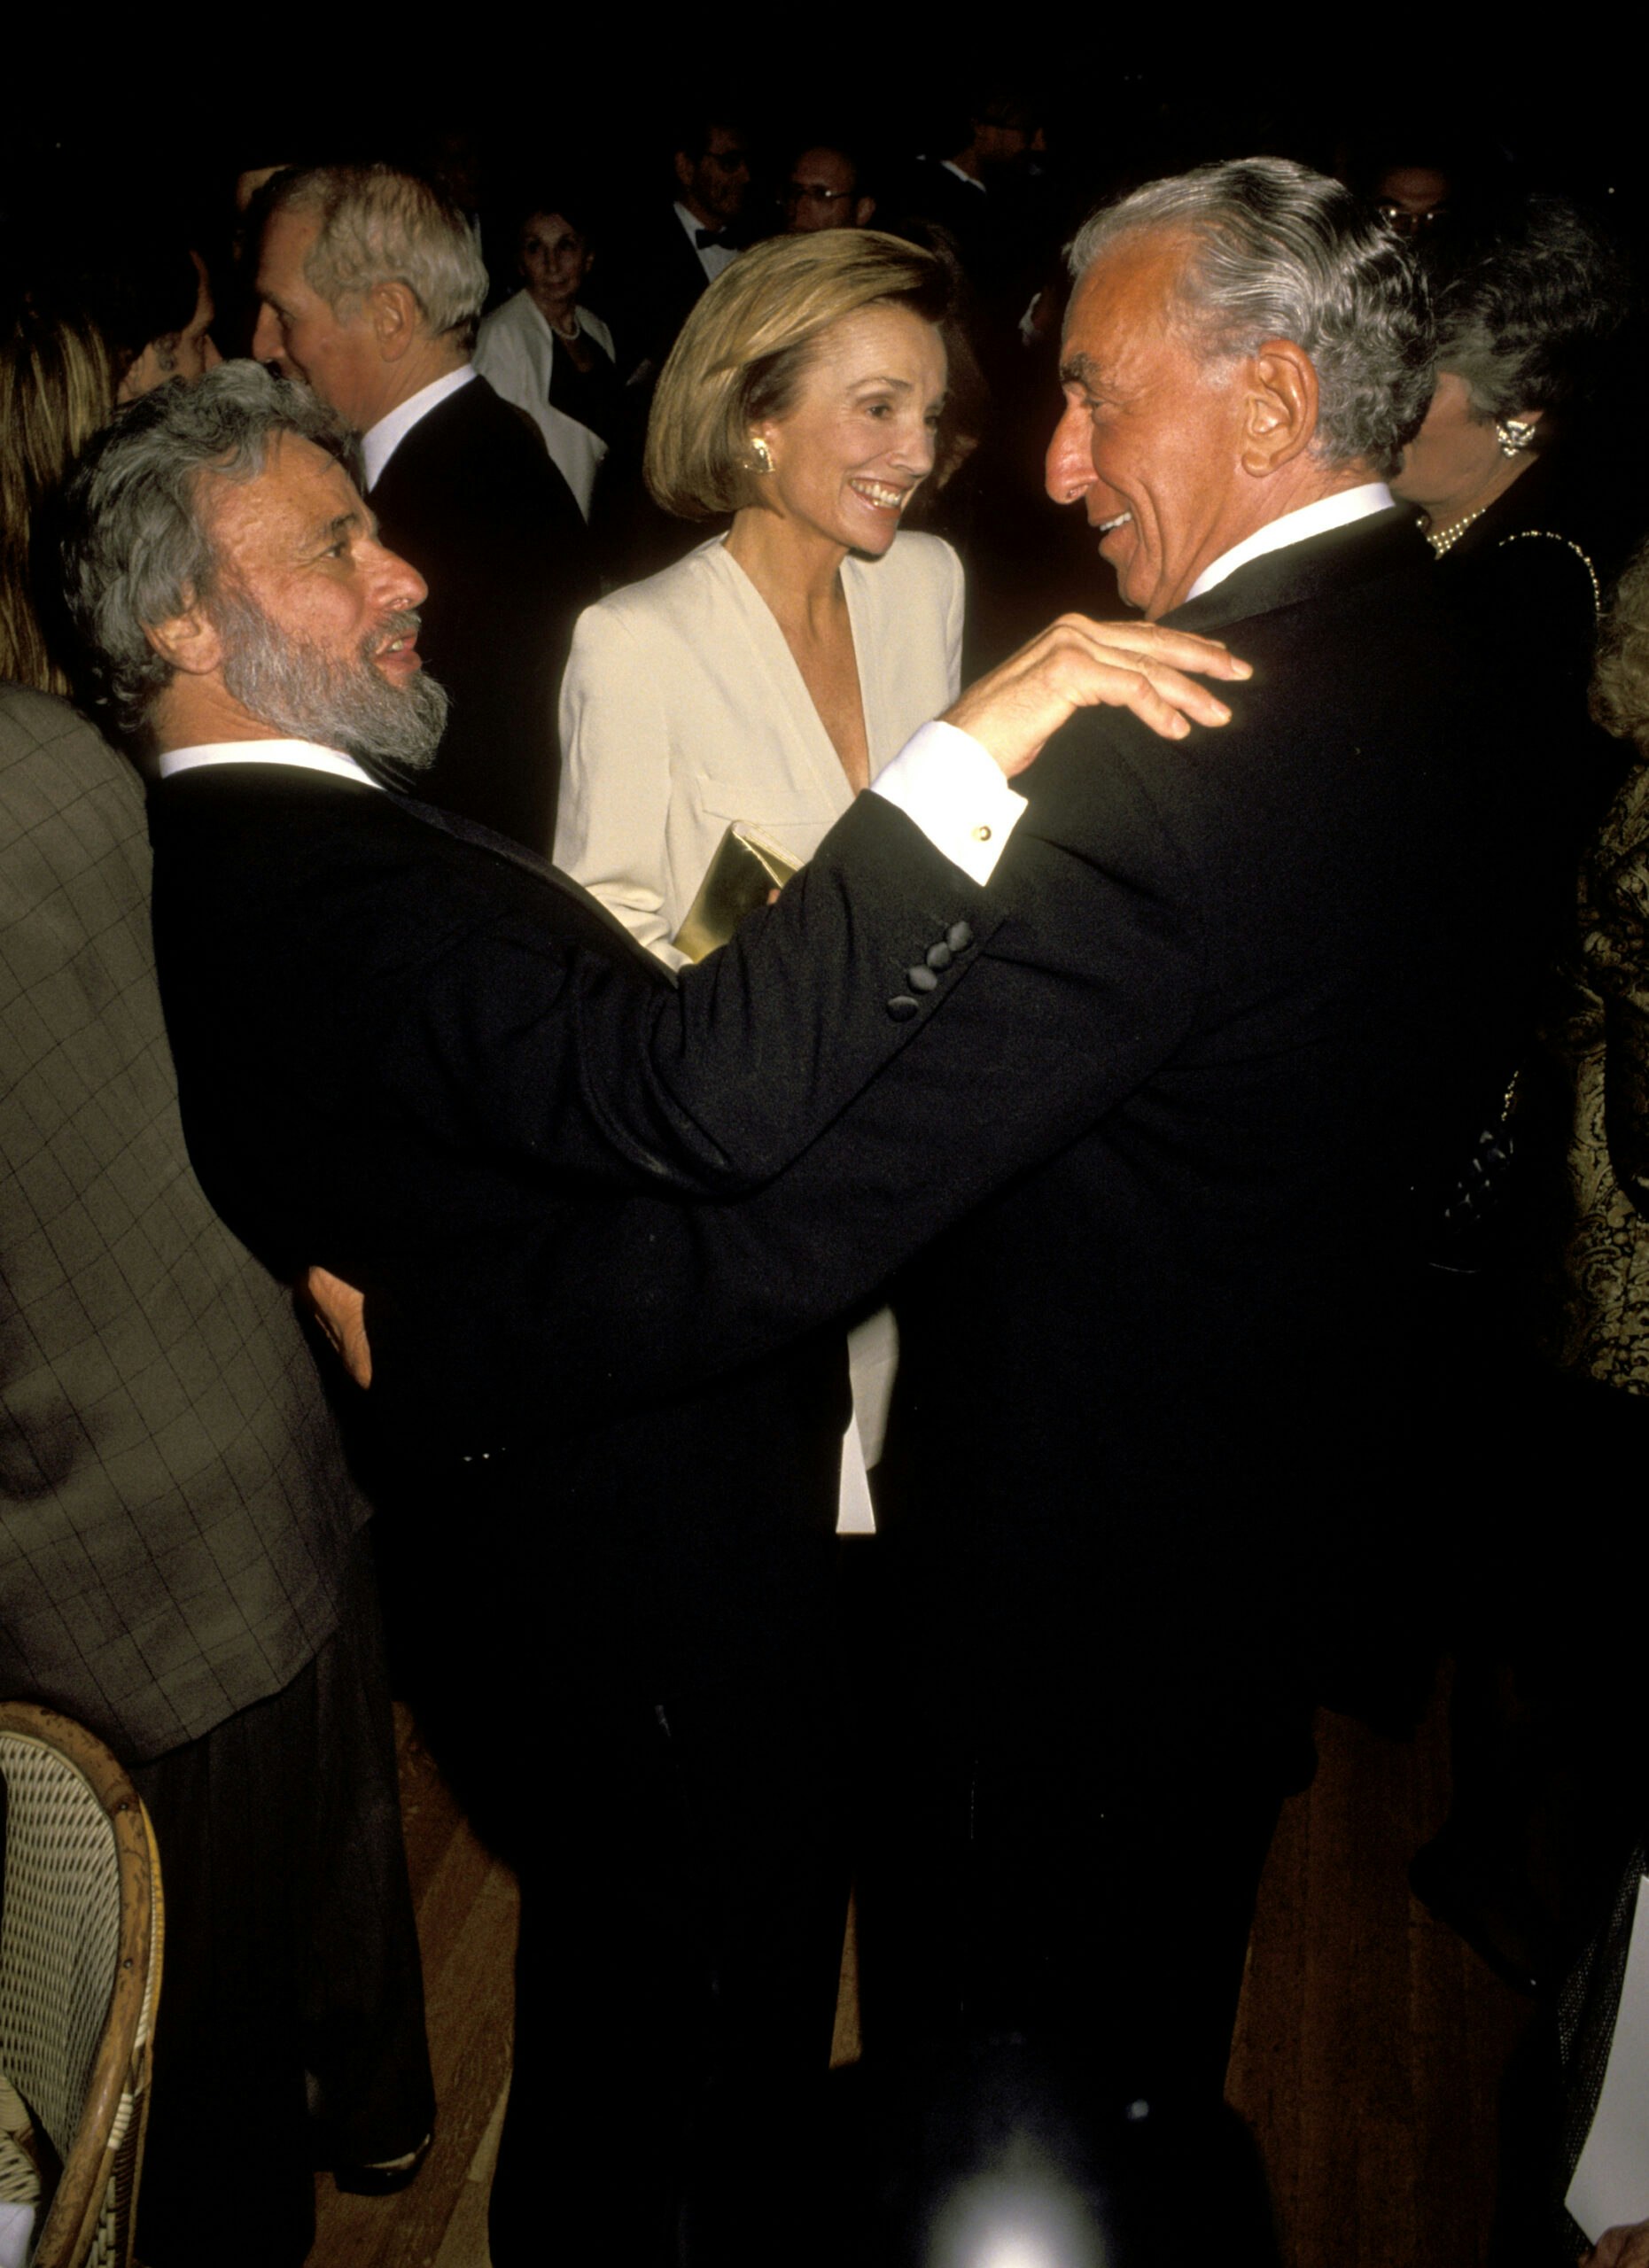 Stephen Sondheim, Lee Radziwell, and Herb Ross during The Poetry of Song Benefit Honoring Stephen Sondheim at Laura Belle Club in New York City, New York, United States. (Photo by Ron Galella/Ron Galella Collection via Getty Images)